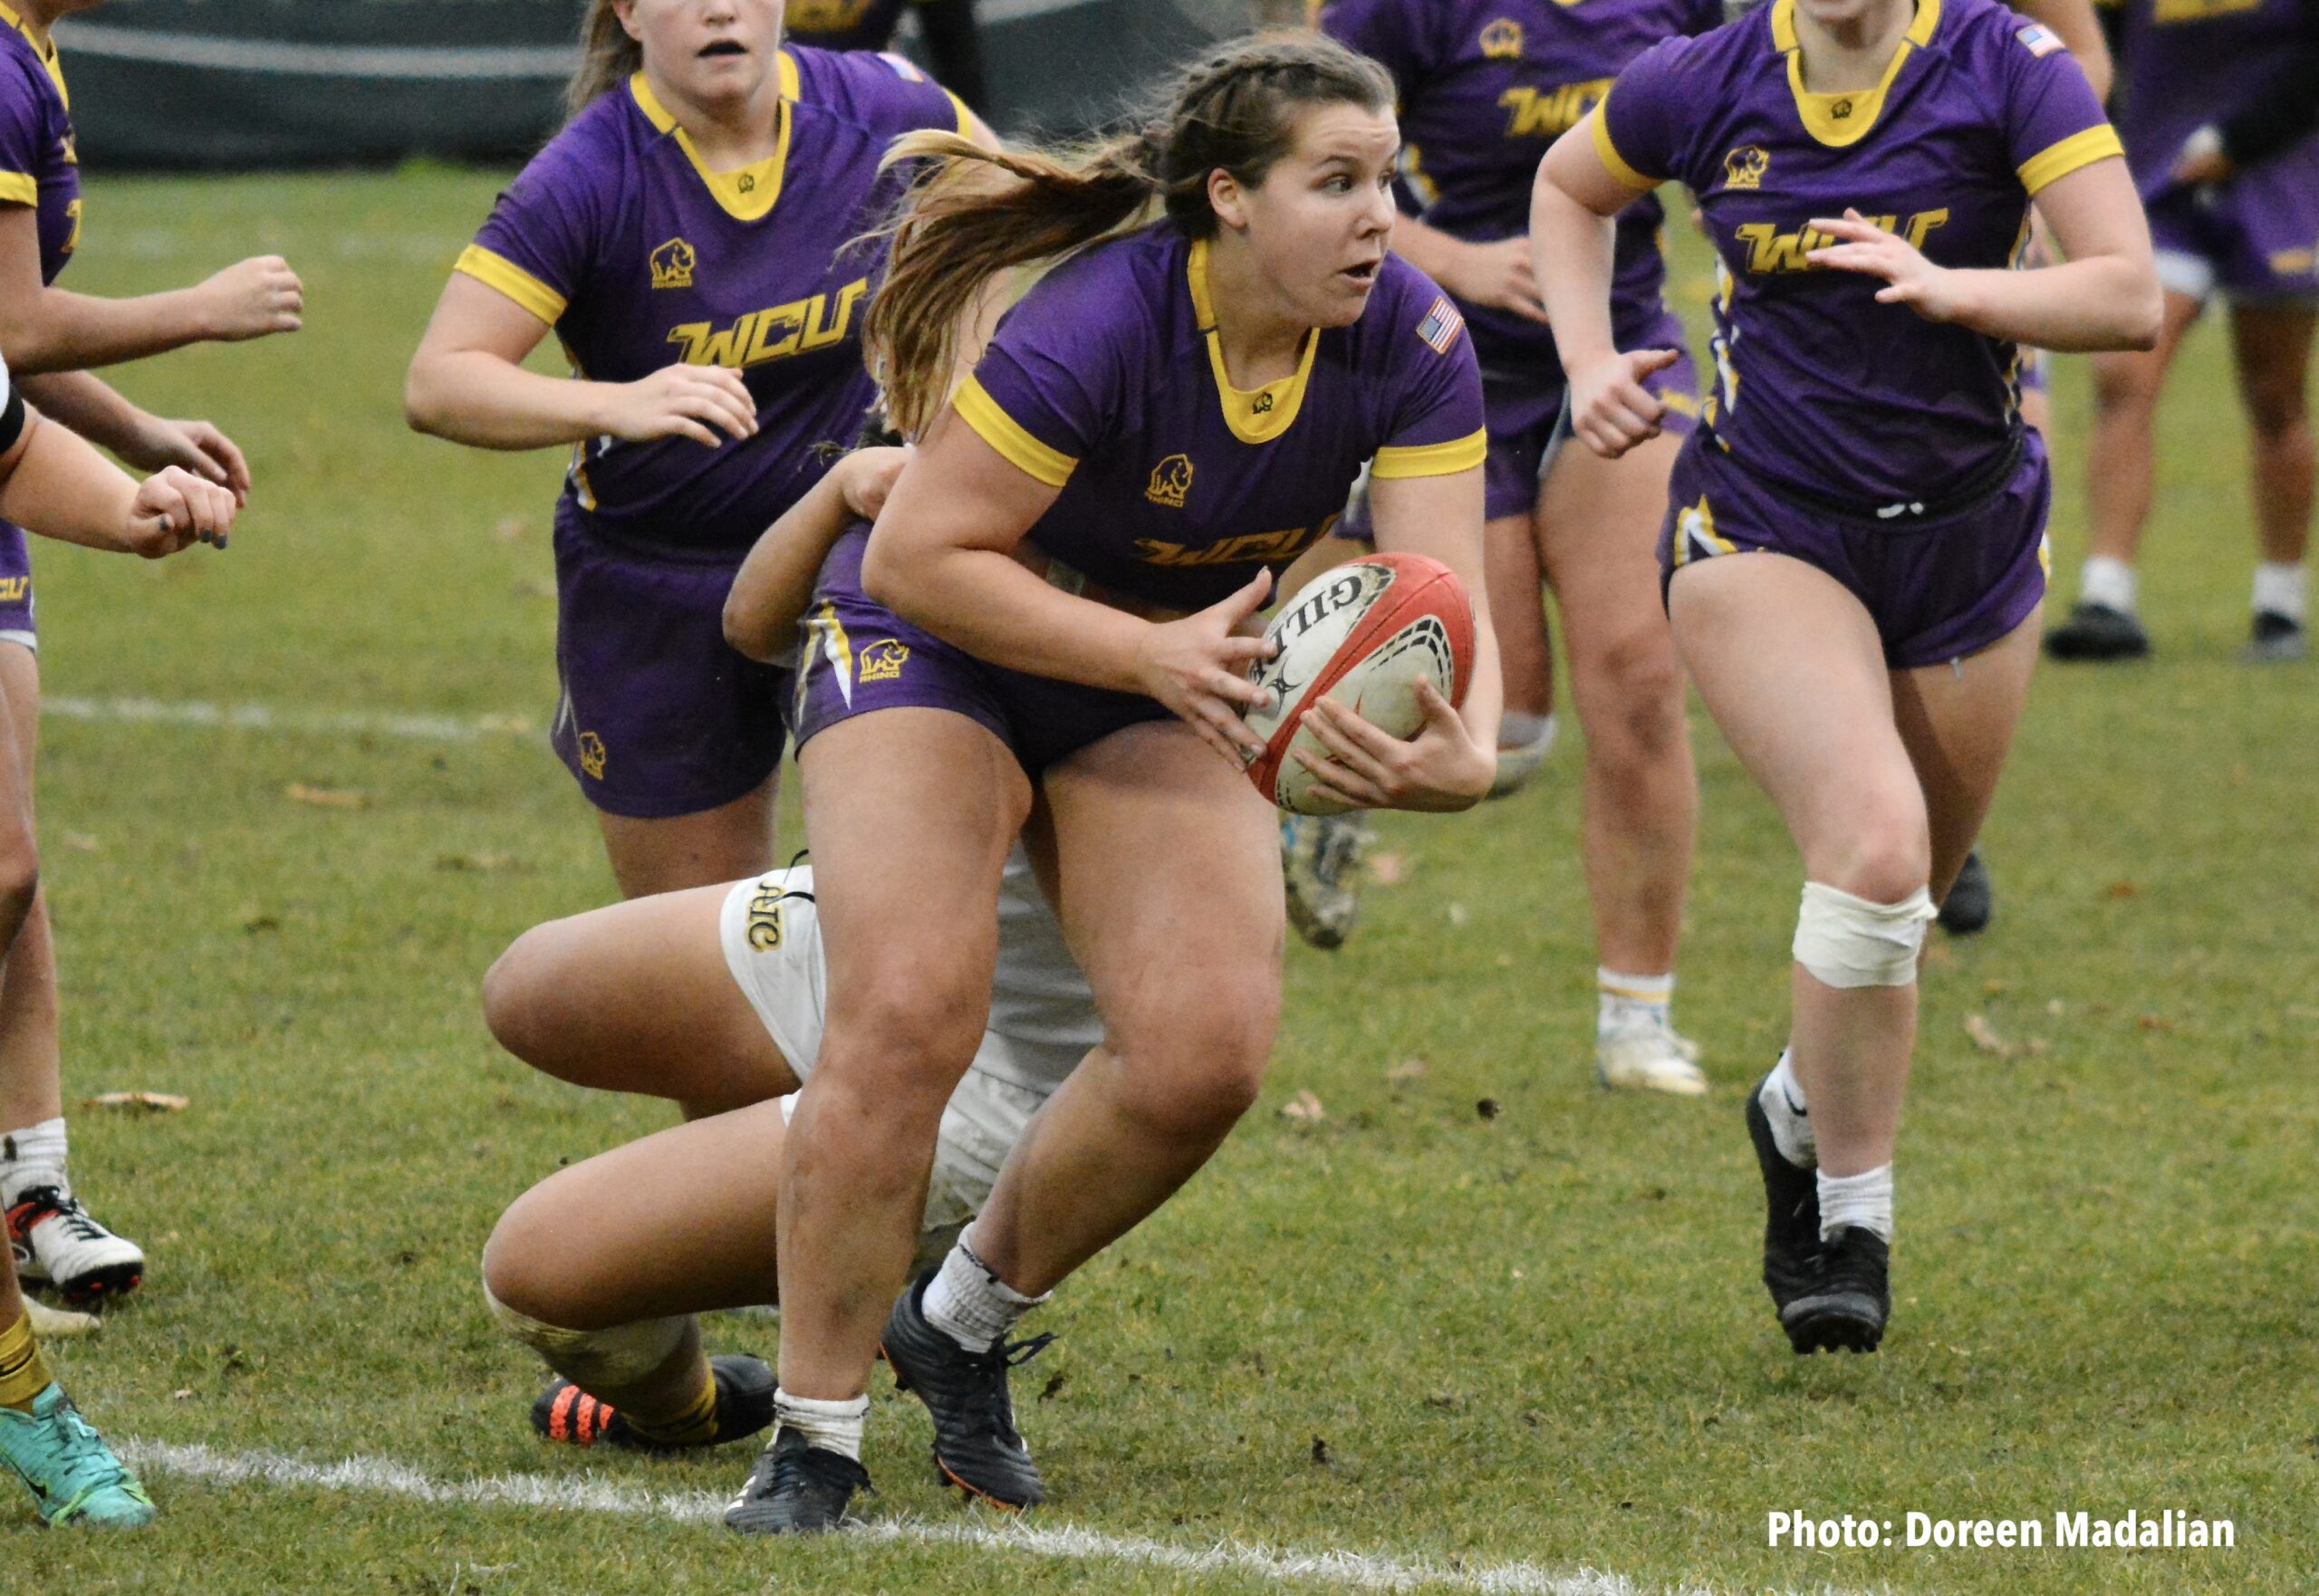 West Chester rugby